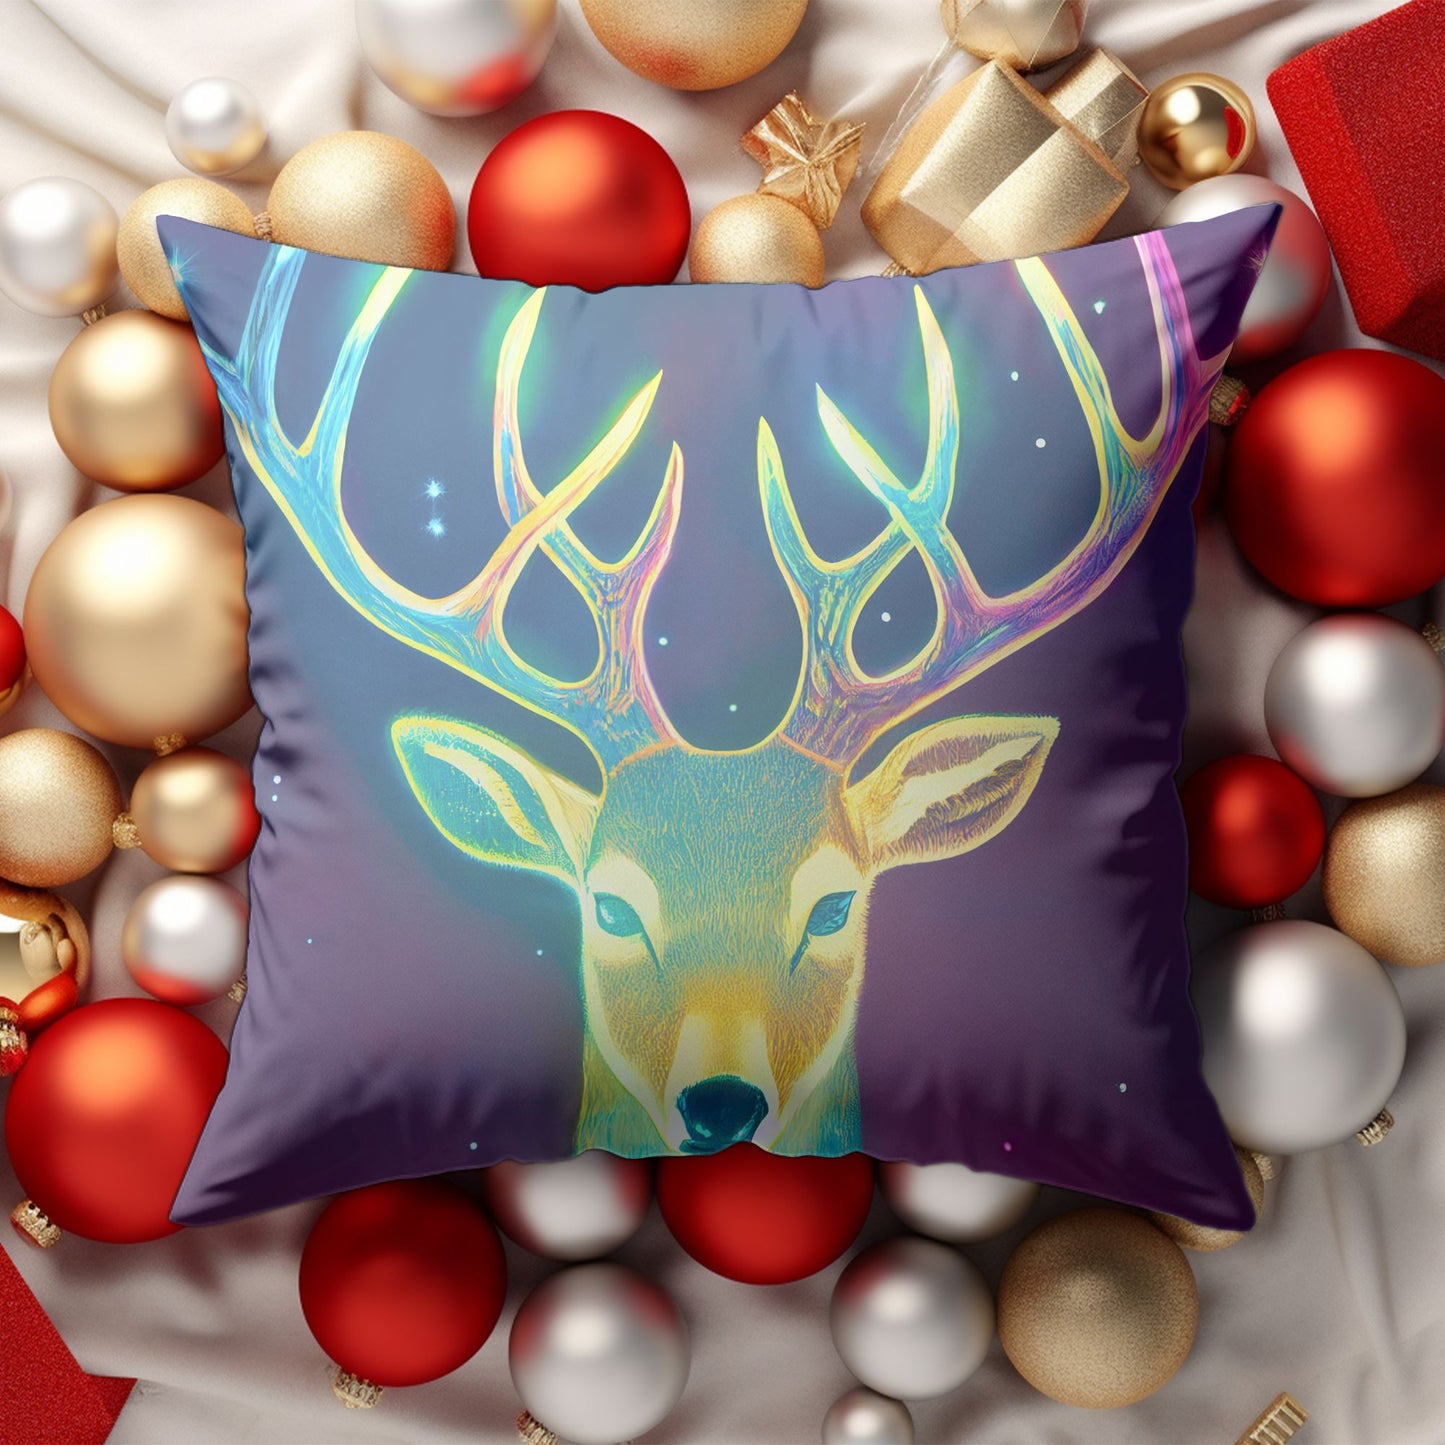 Colorful Reindeer Motif Cushion Cover for Holiday Season